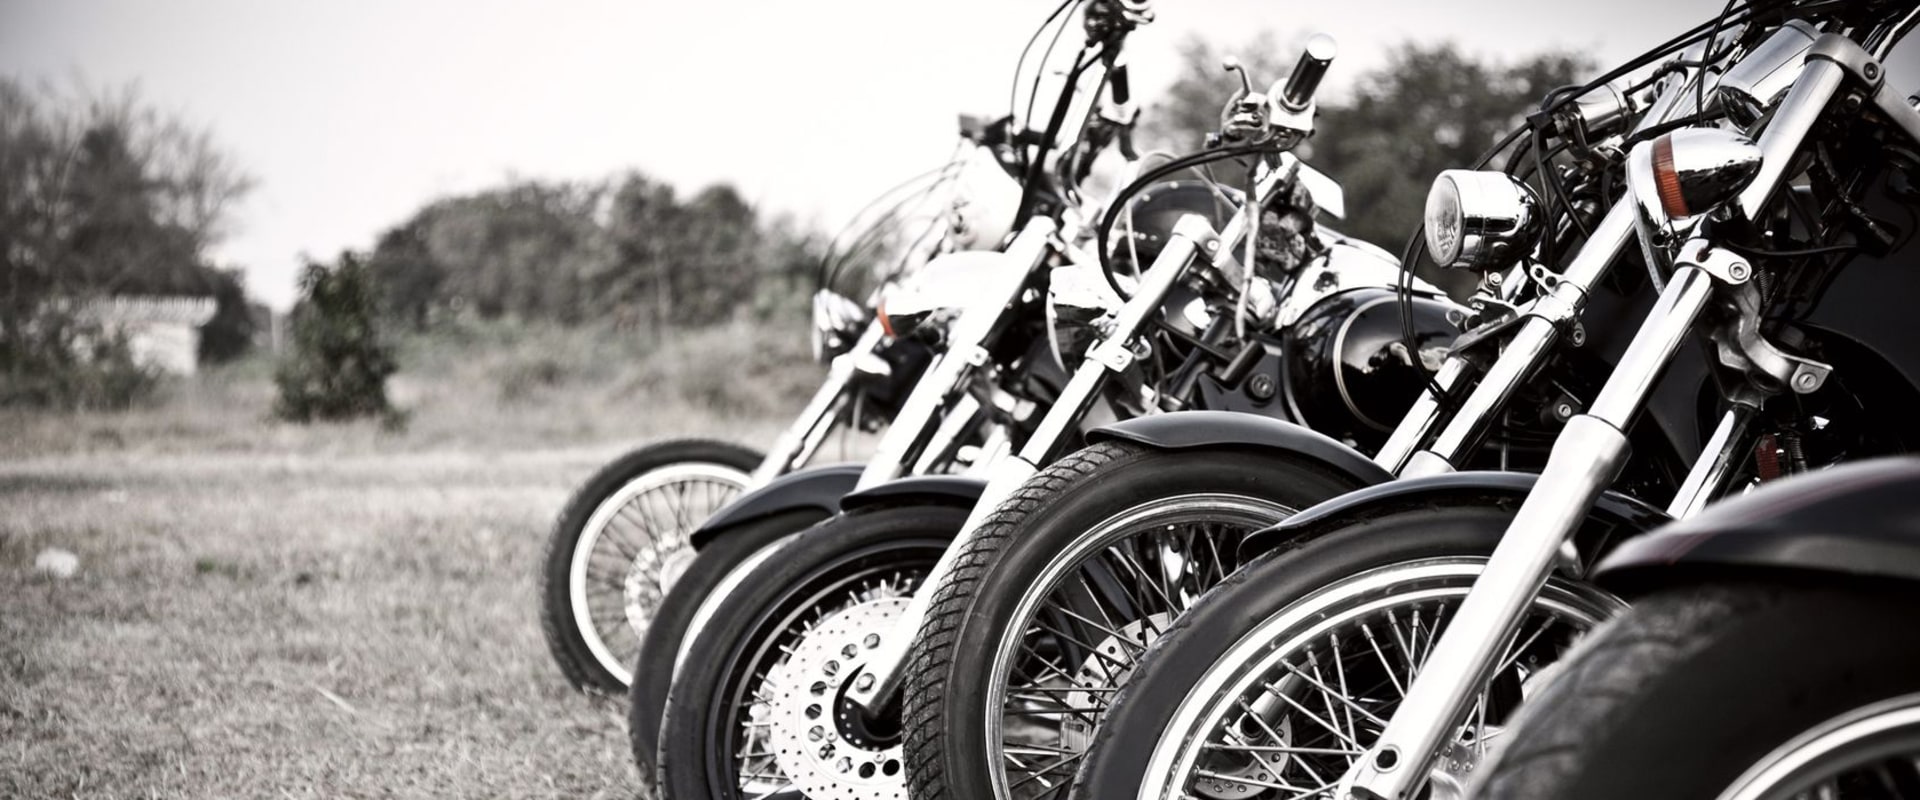 How Much Does Motorcycle Insurance Cost With Markel?